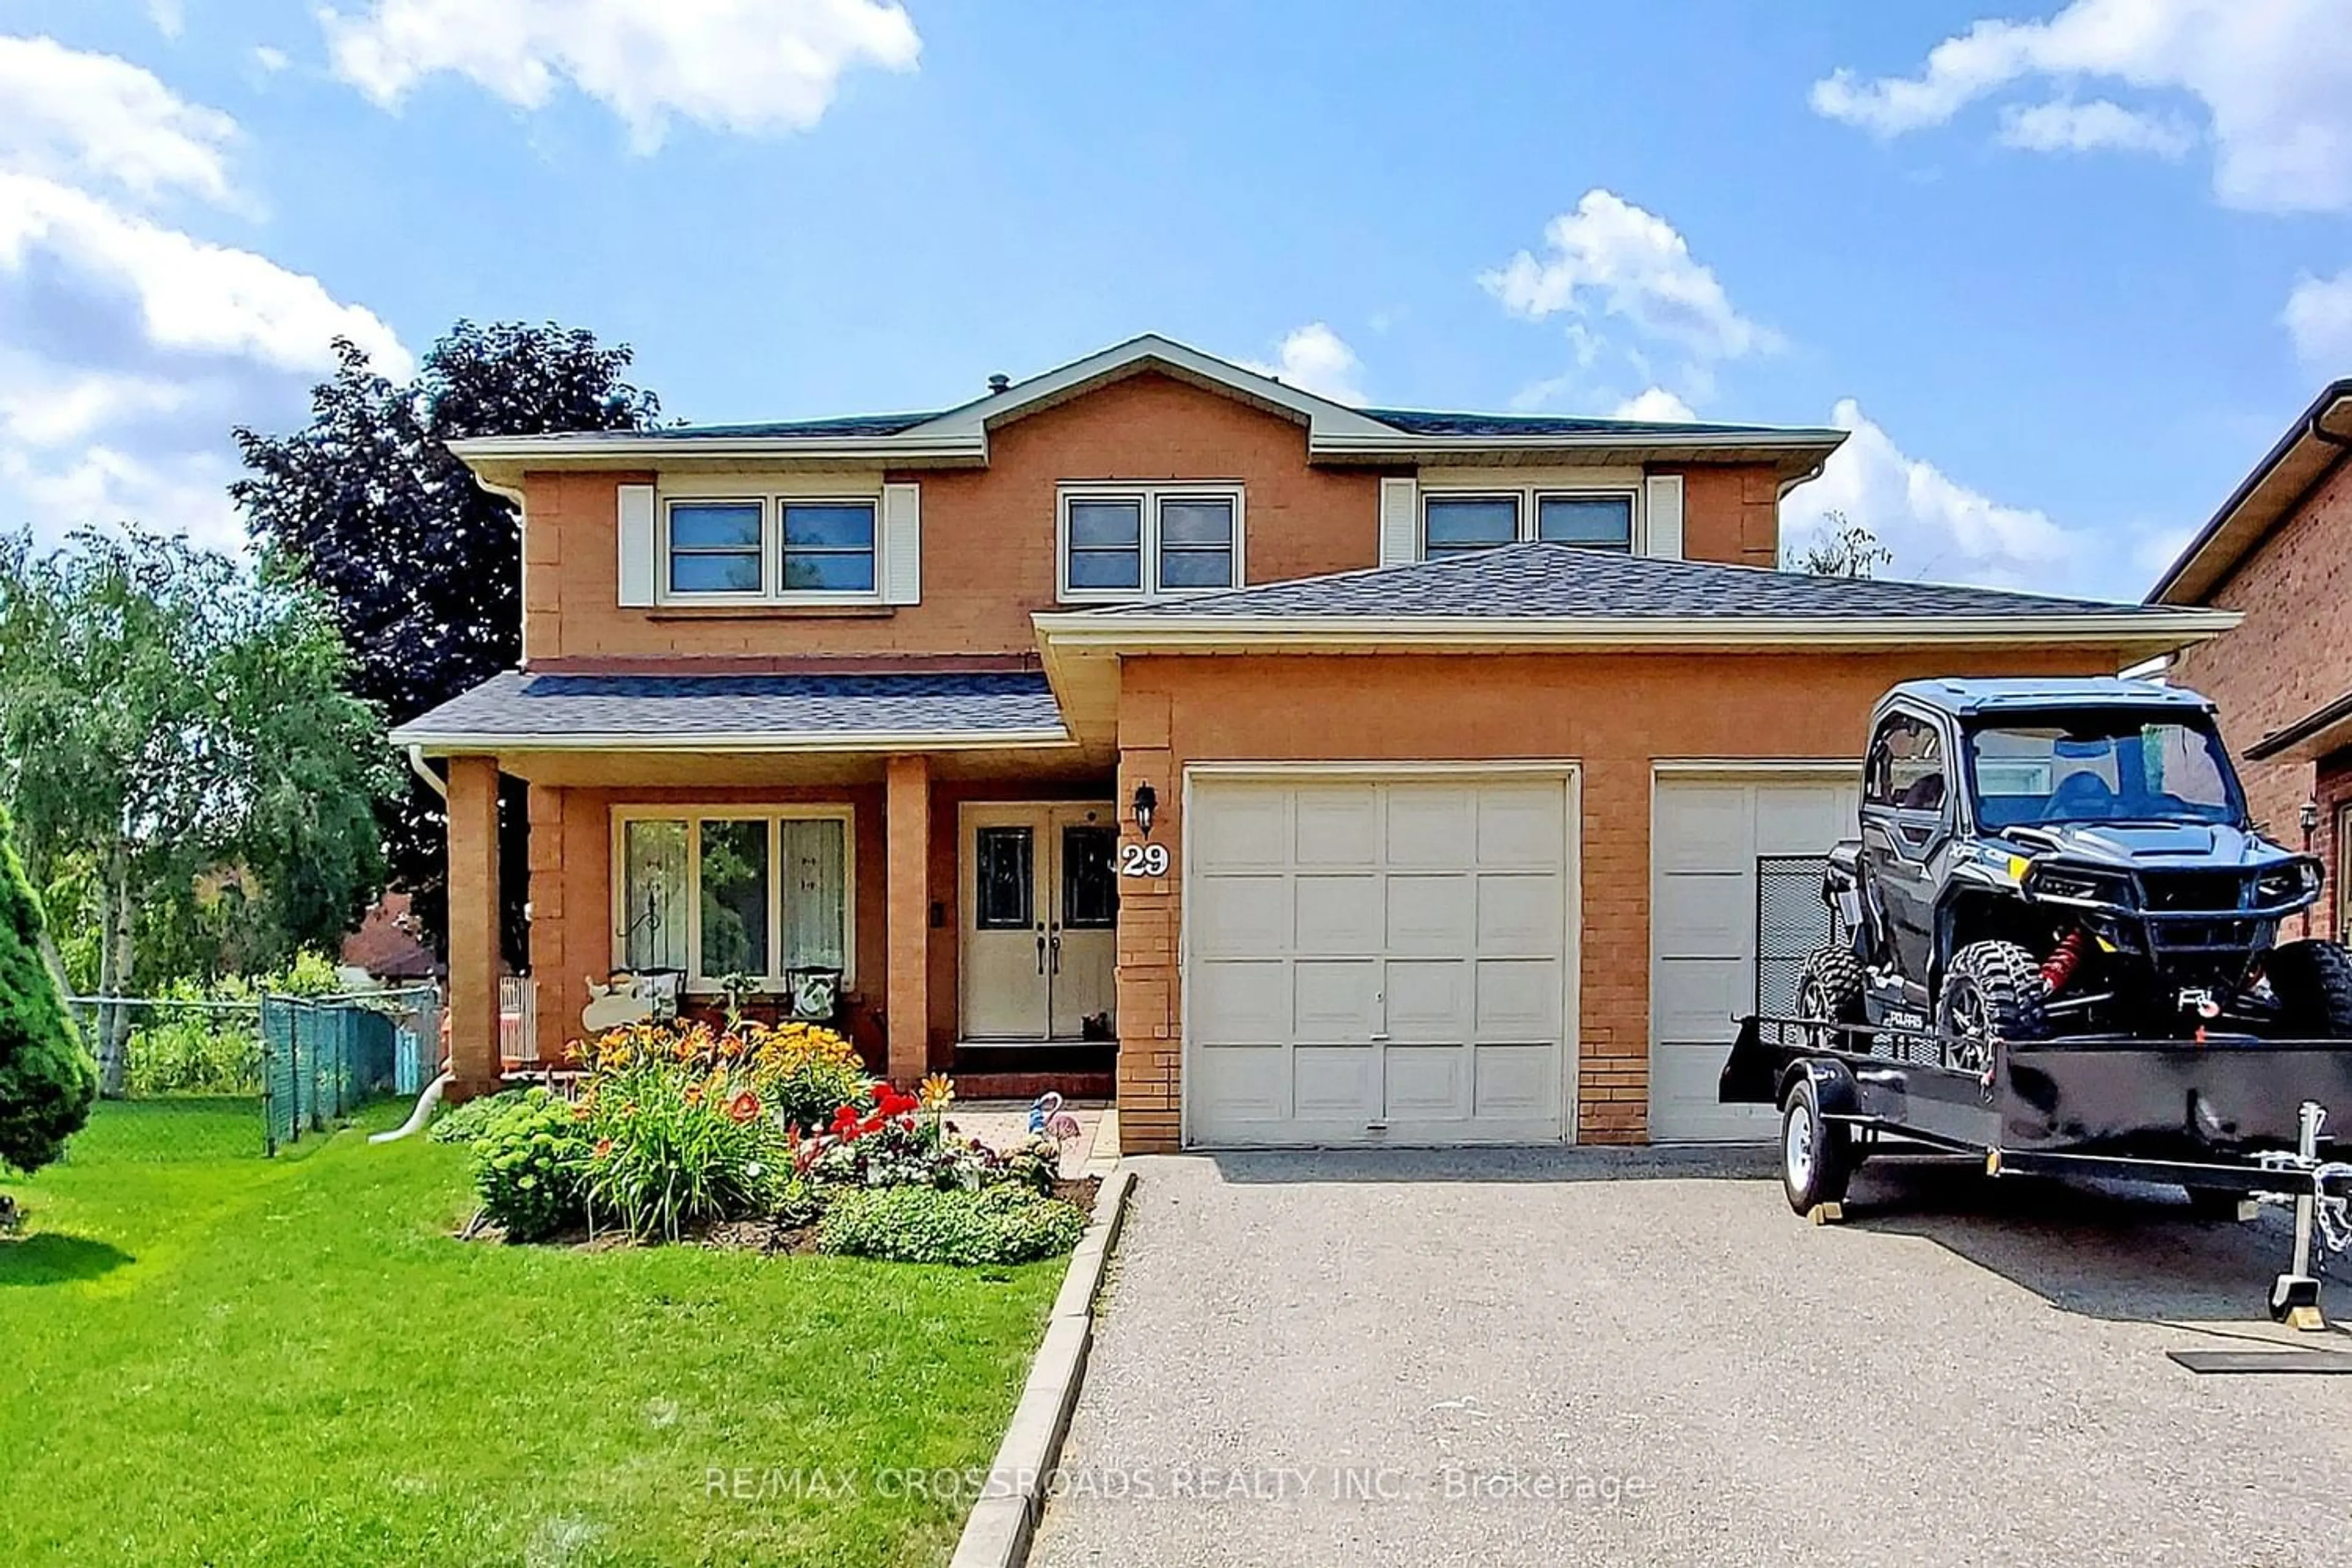 Home with brick exterior material for 29 Glouster Crt, Richmond Hill Ontario L4C 8L4